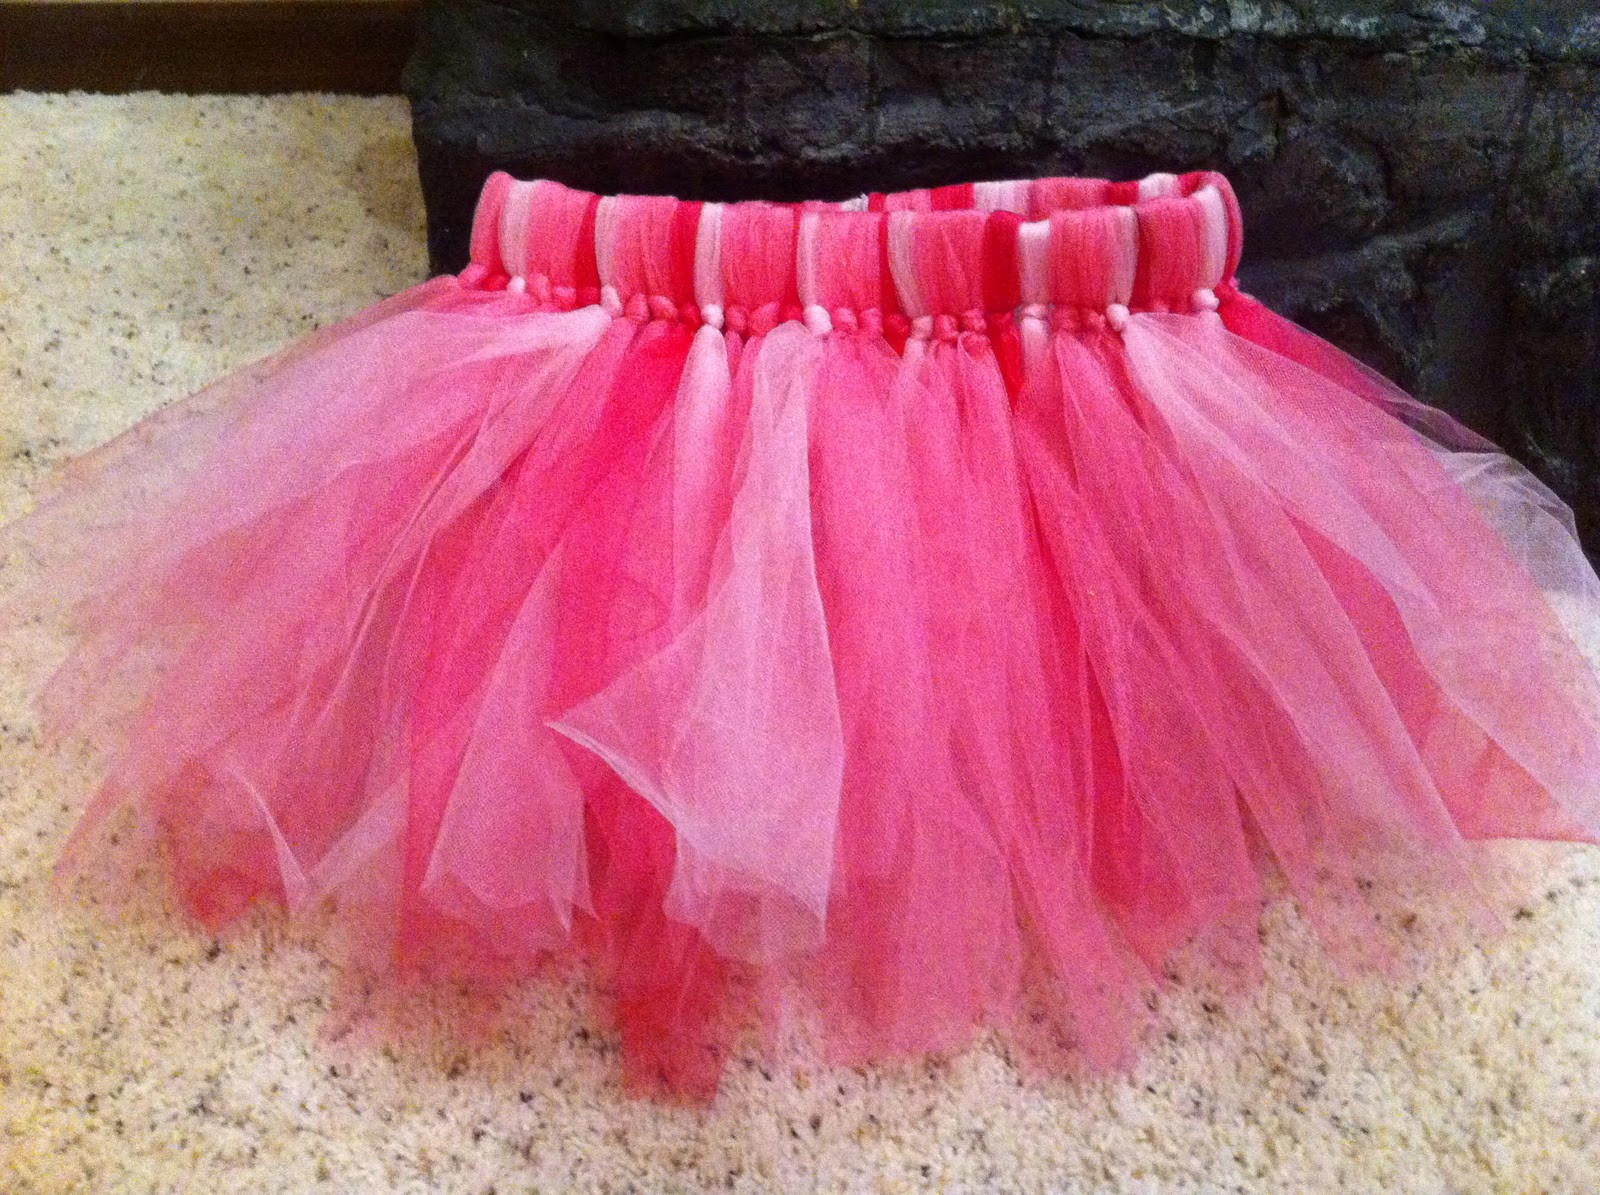 Toddler Tulle Skirt DIY
 DIY Valentine s Day Projects Tulle Skirt